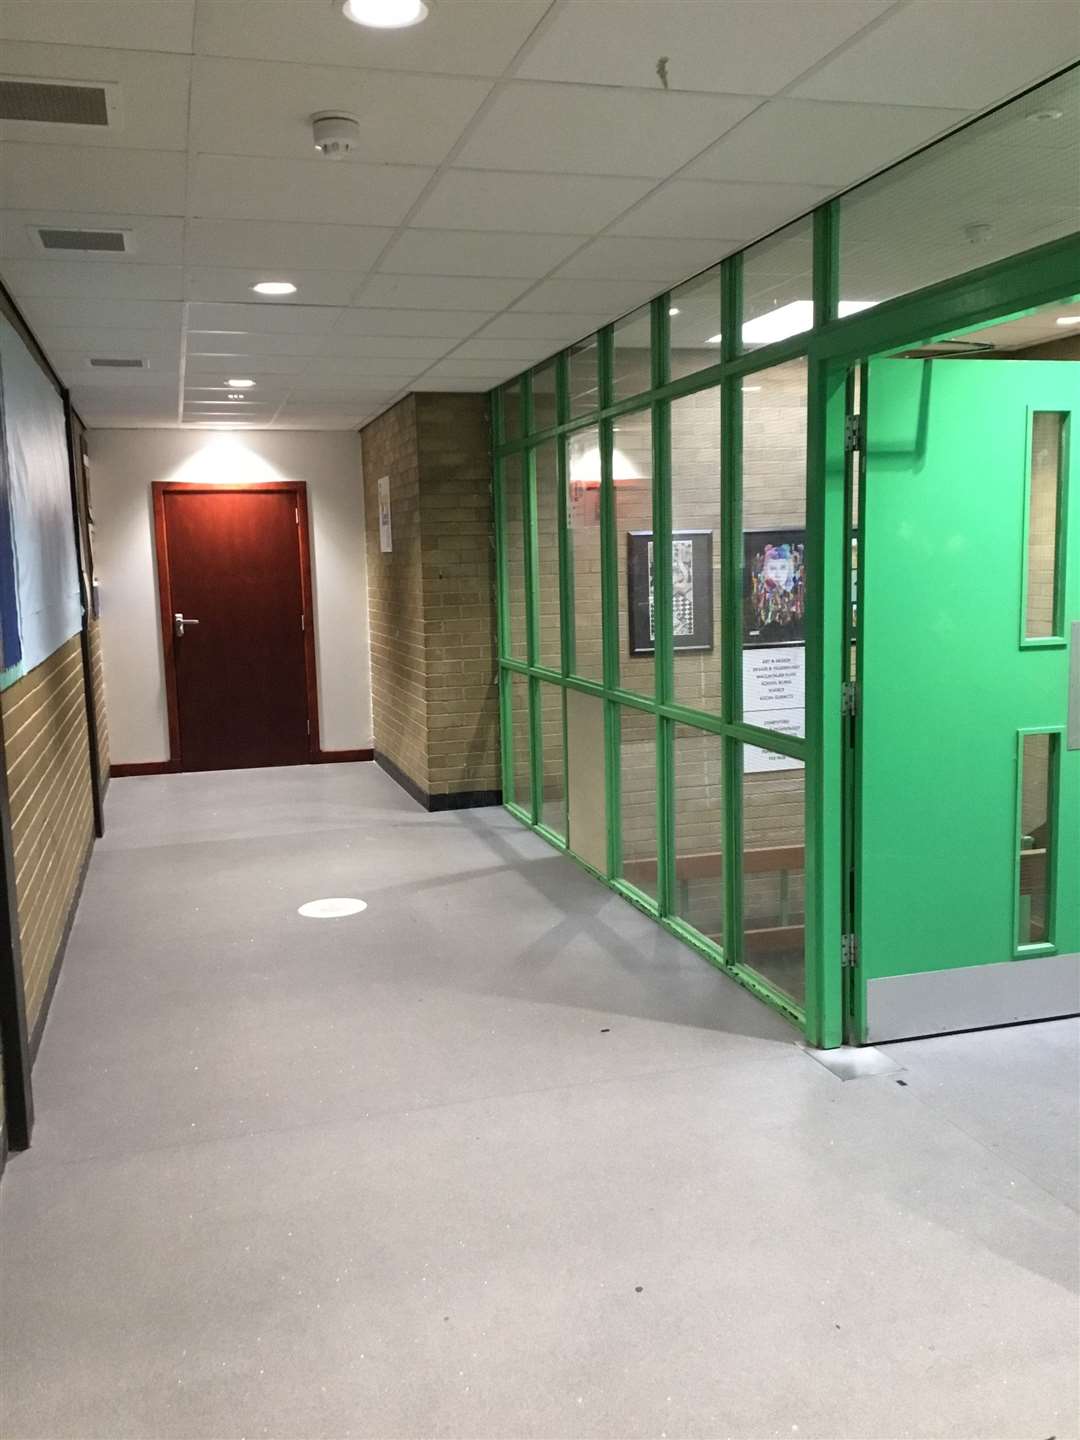 A first floor corridor at Forres Academy.